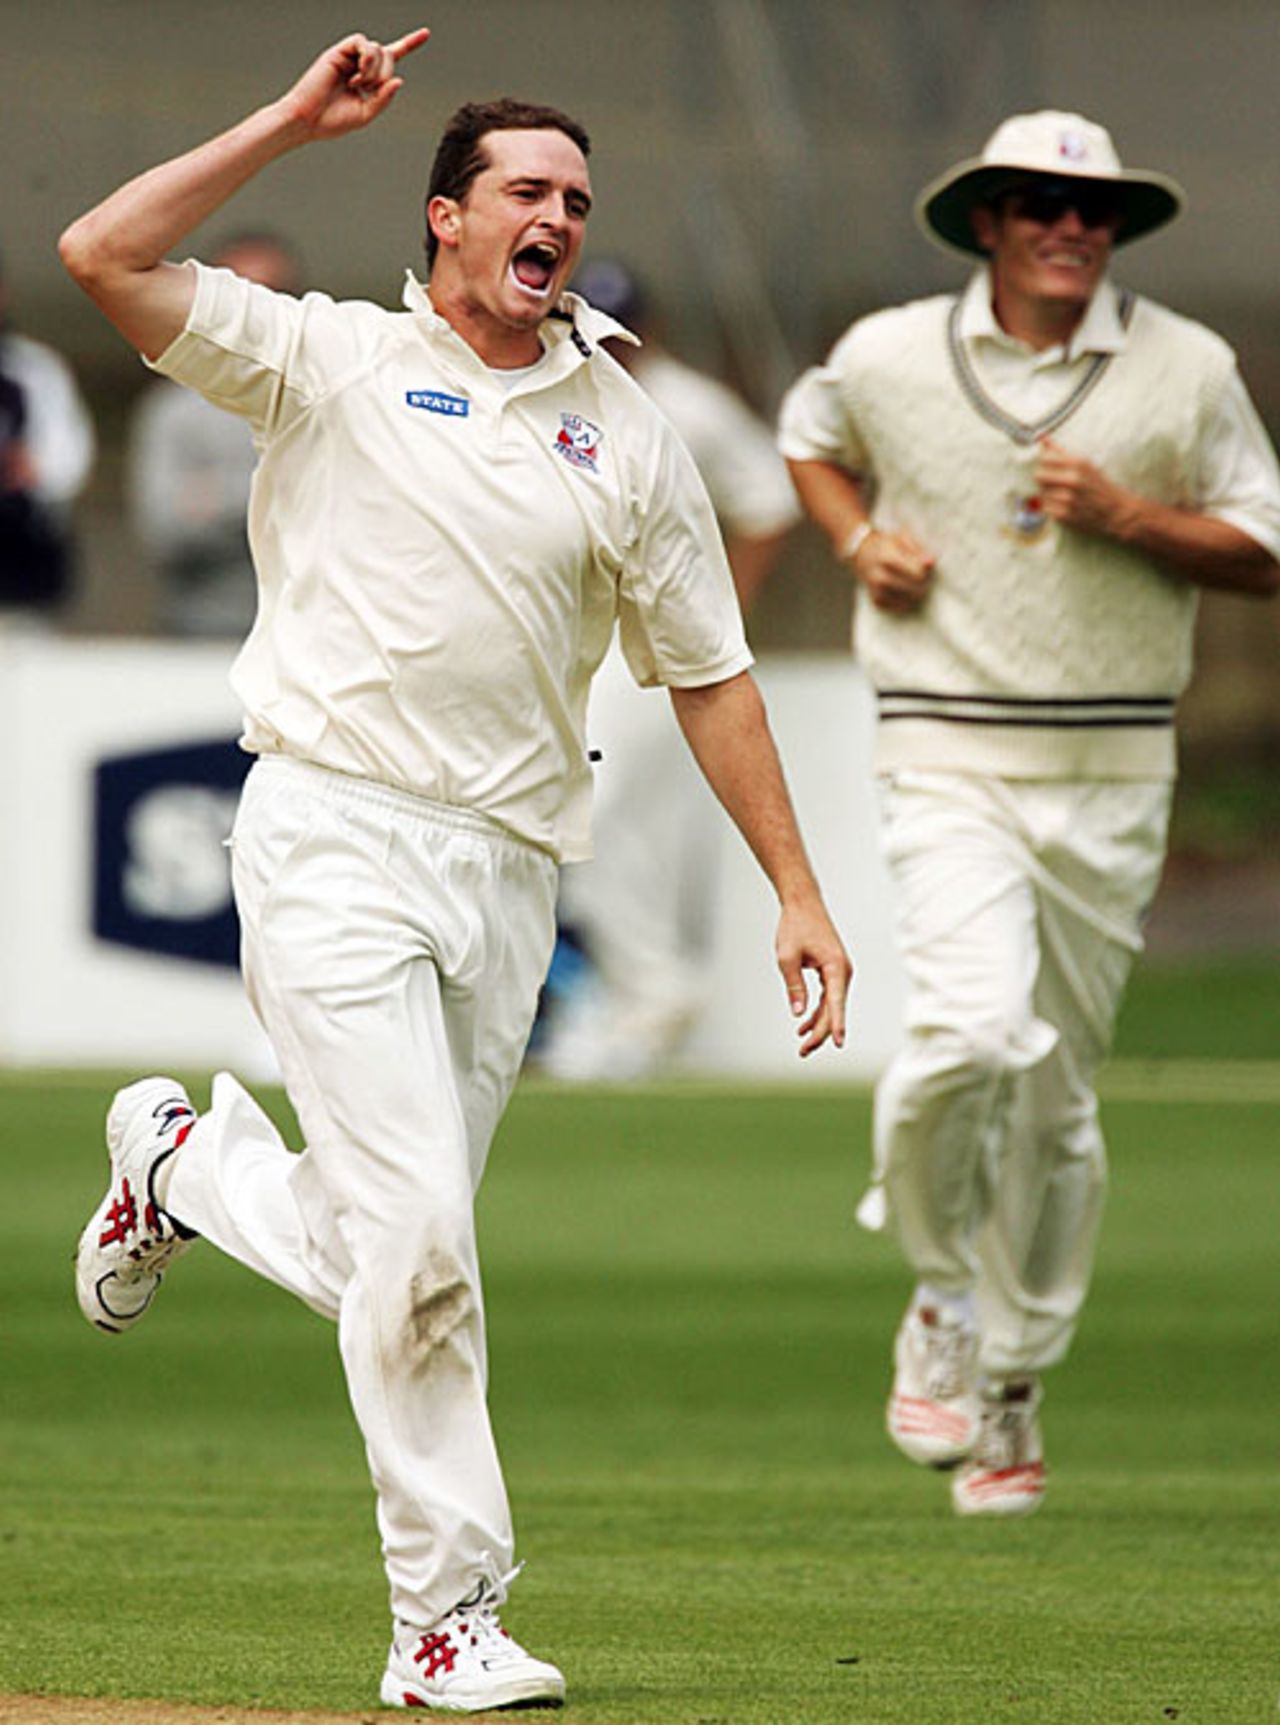 Lance Shaw celebrates a wicket, Auckland v Northern Districts, State Championship, Eden Park Outer Oval, December 12, 2007 
